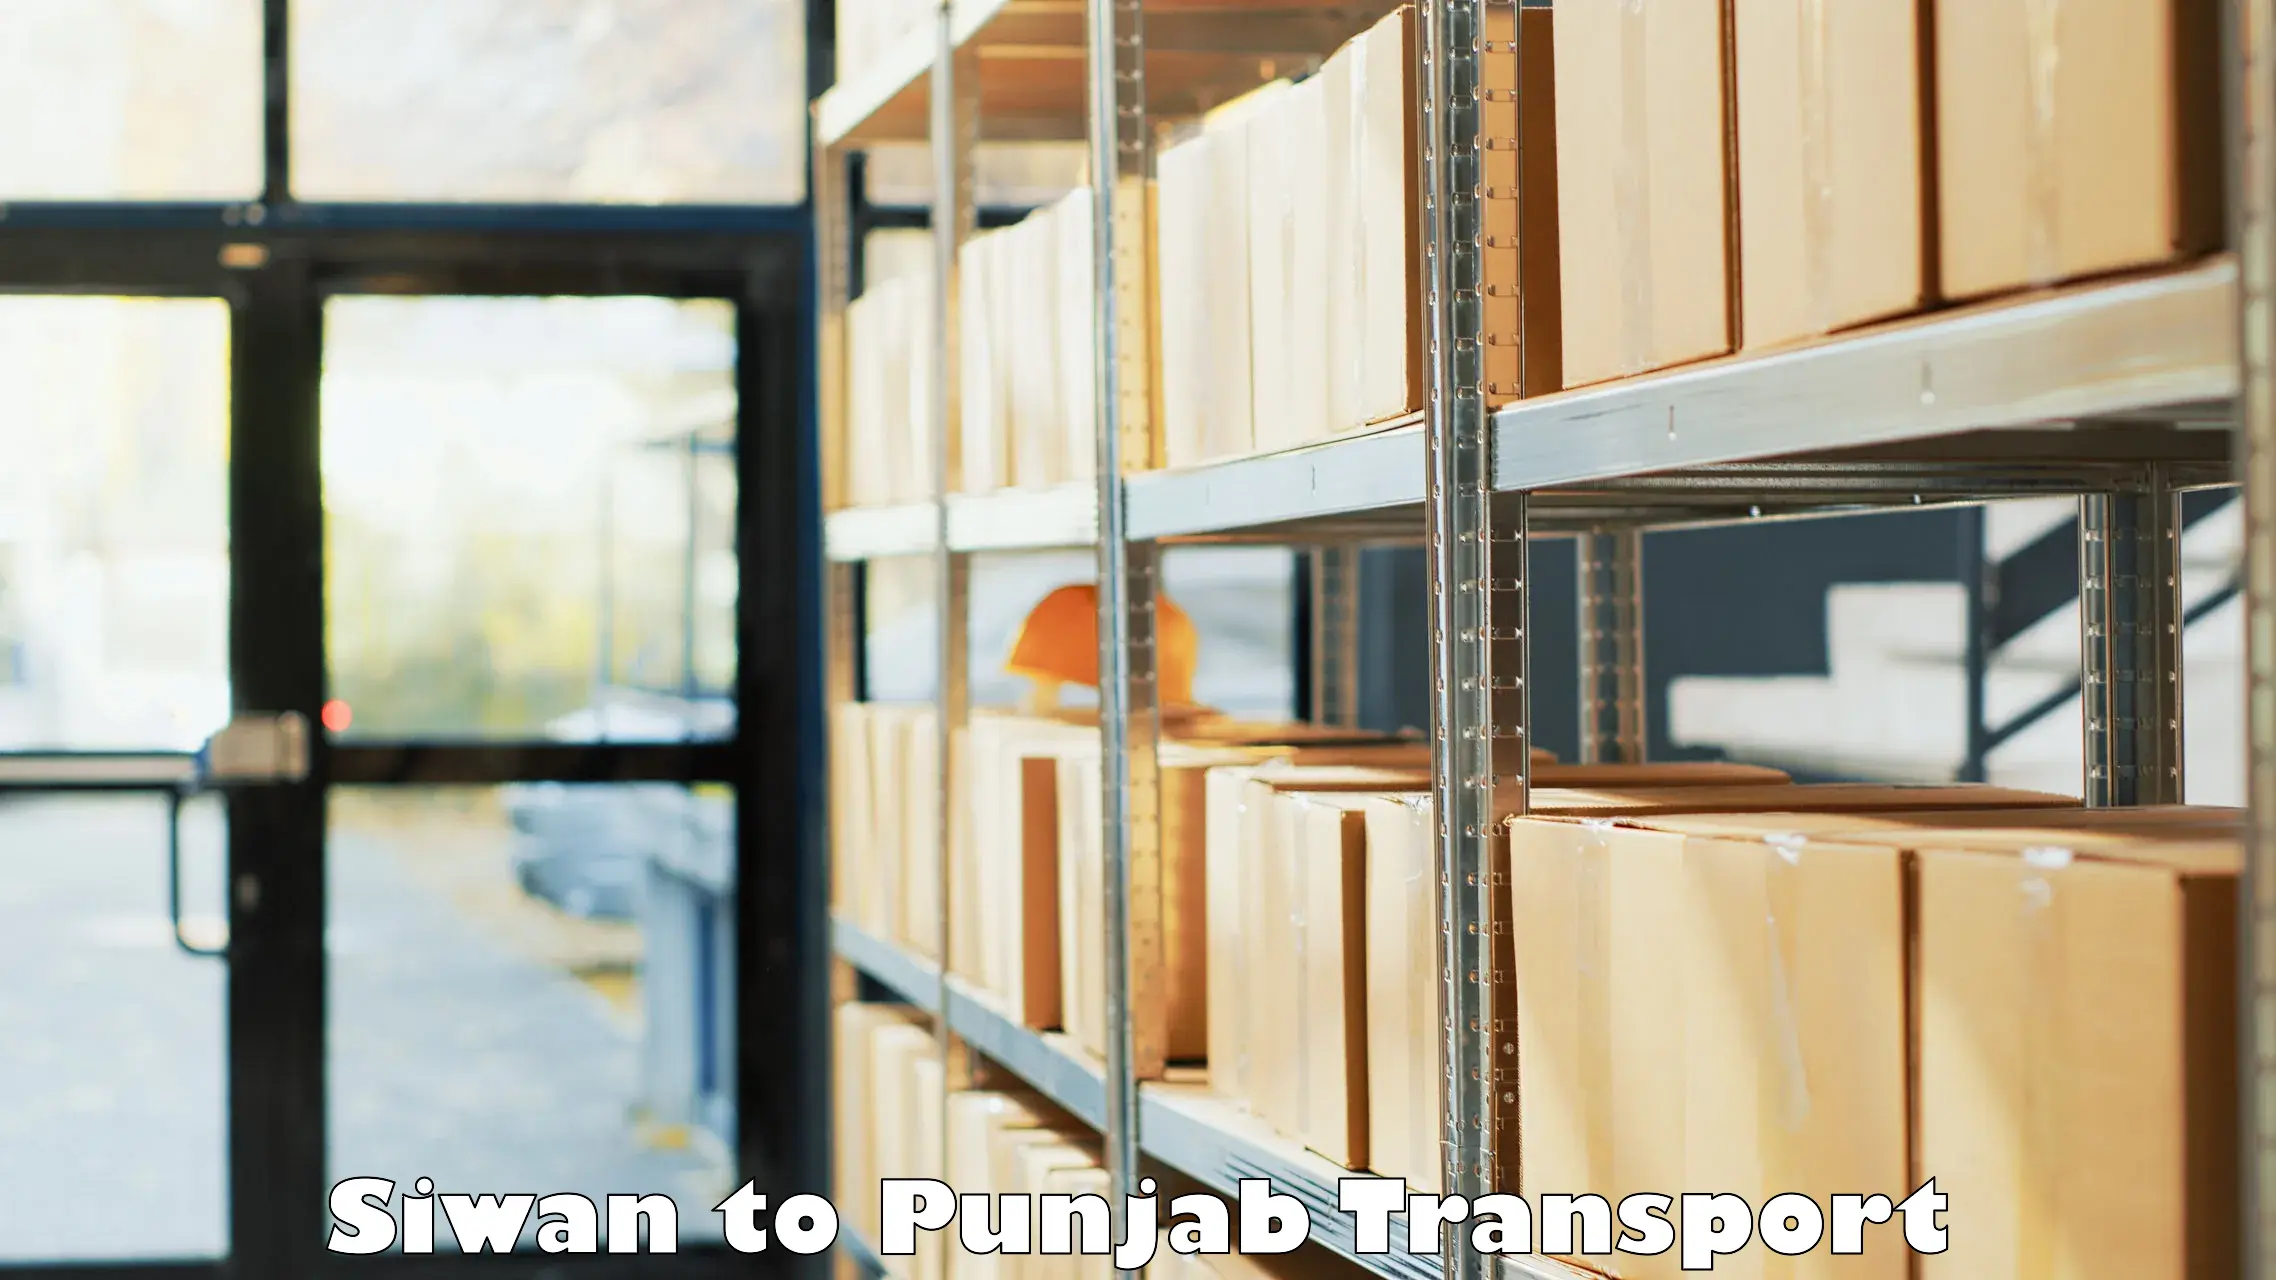 Nearby transport service Siwan to Central University of Punjab Bathinda